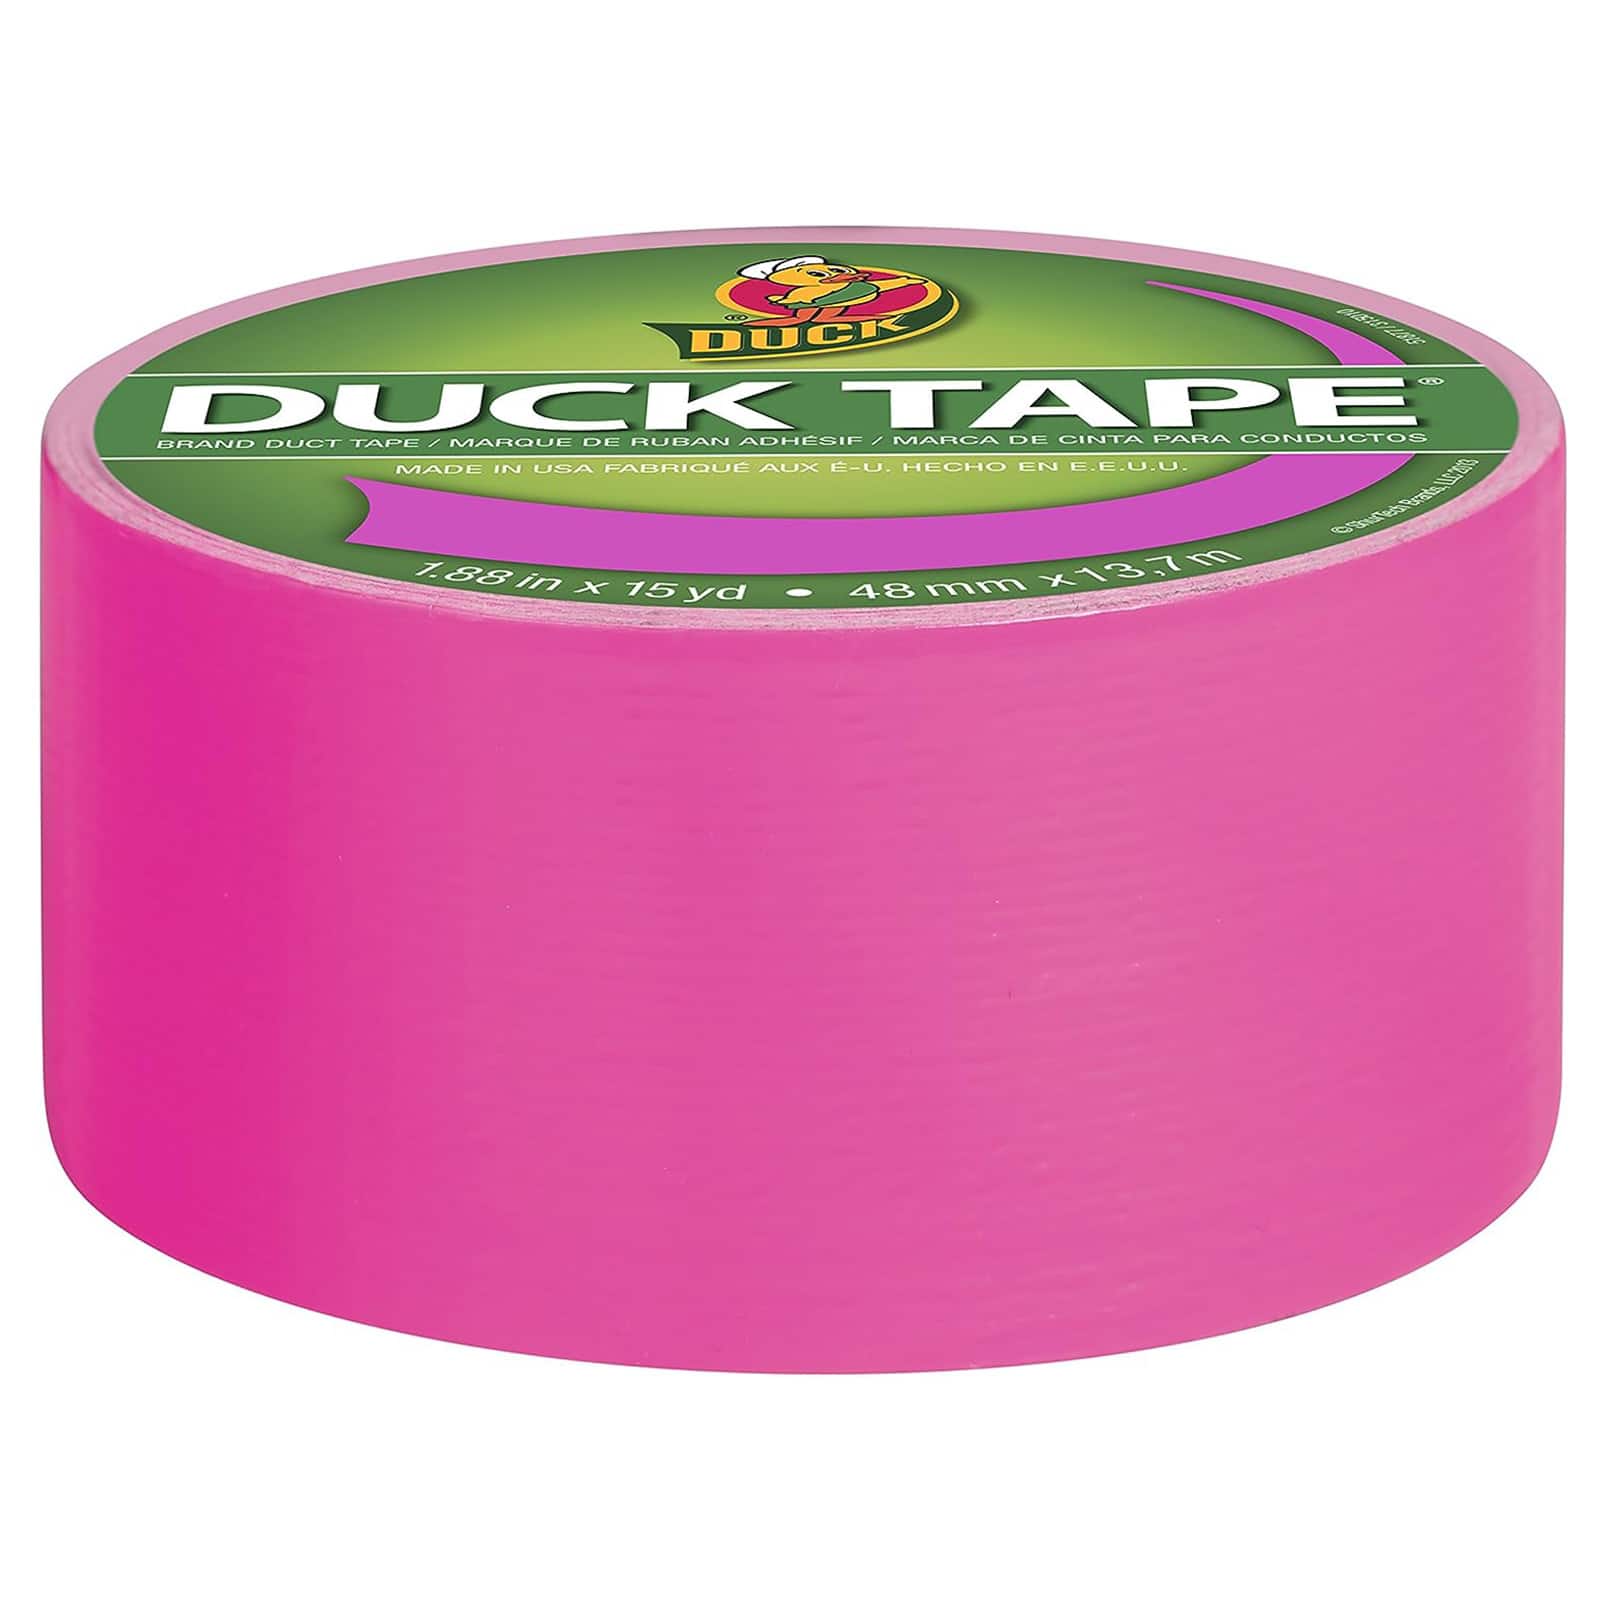 Duck Tape Roll - Neon Floral